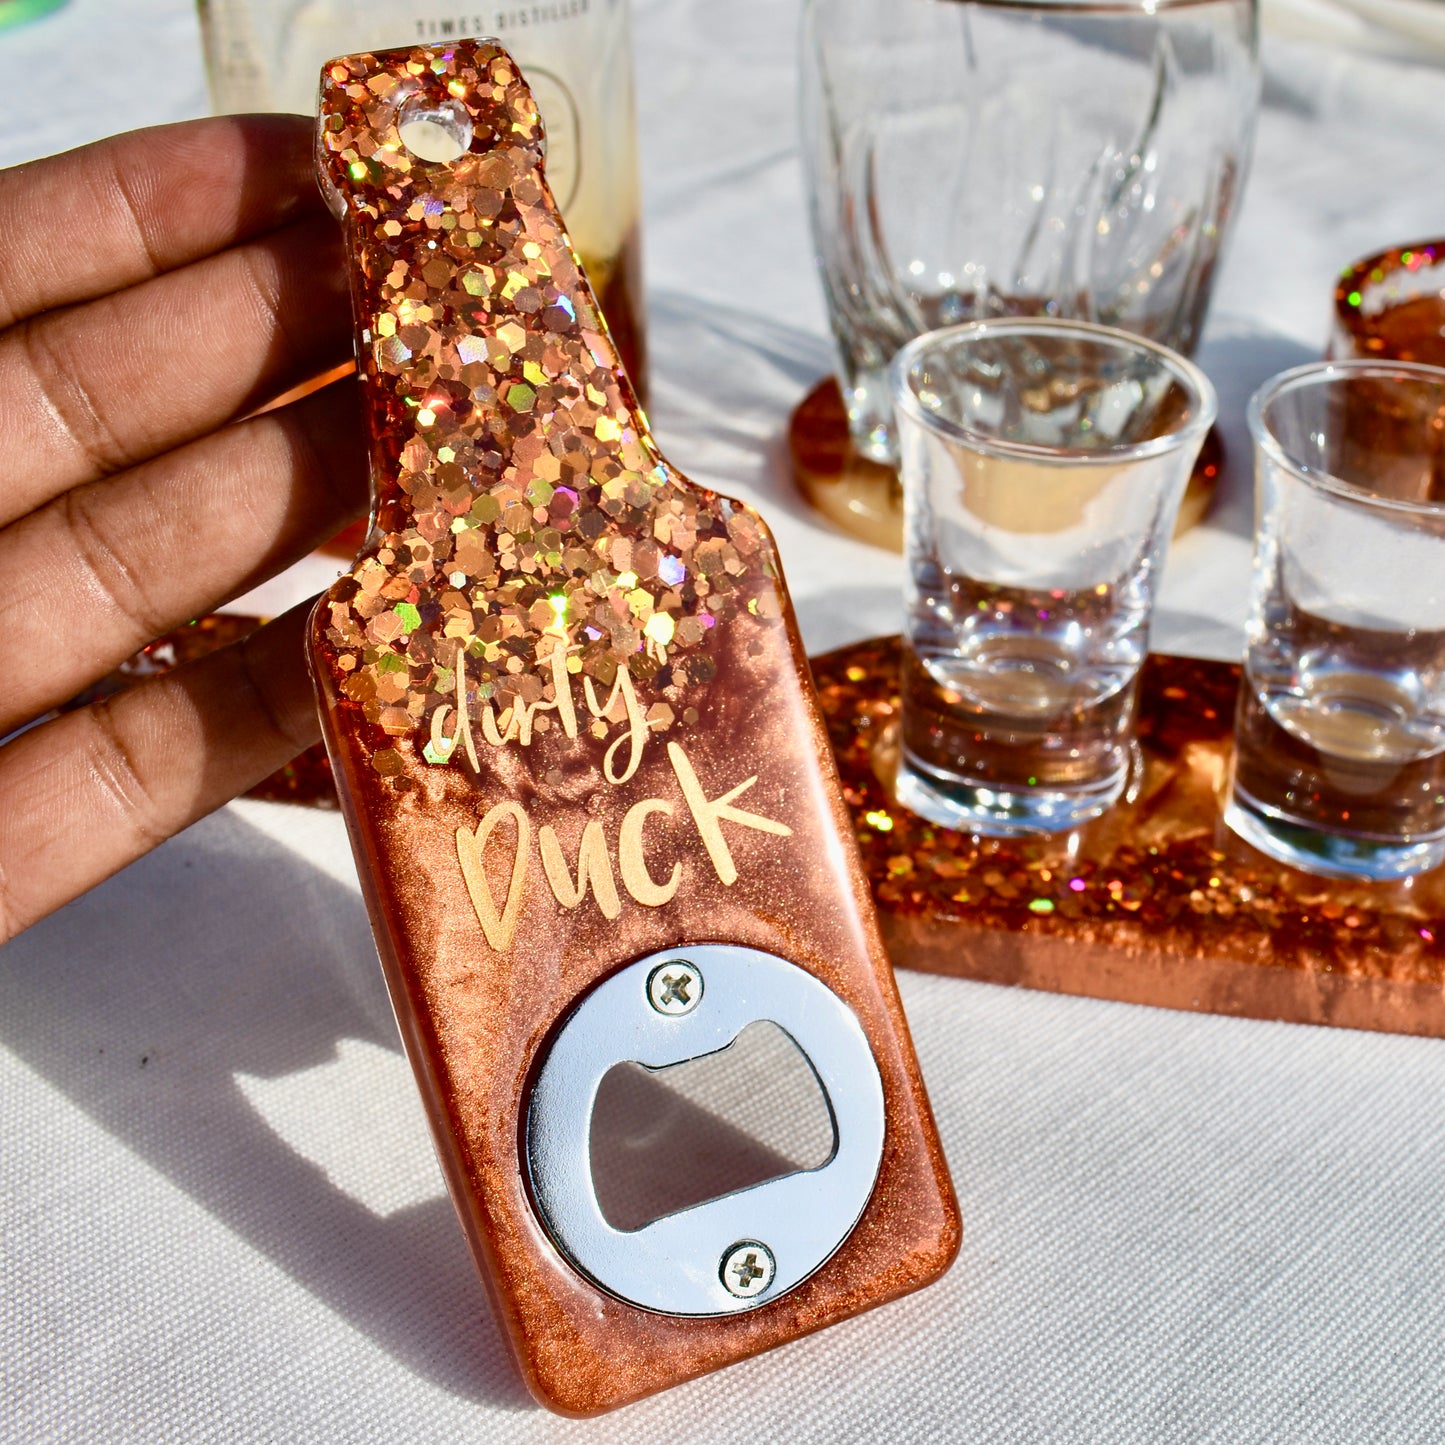 PERSONALIZED Bottle Opener – Home Bar Gift